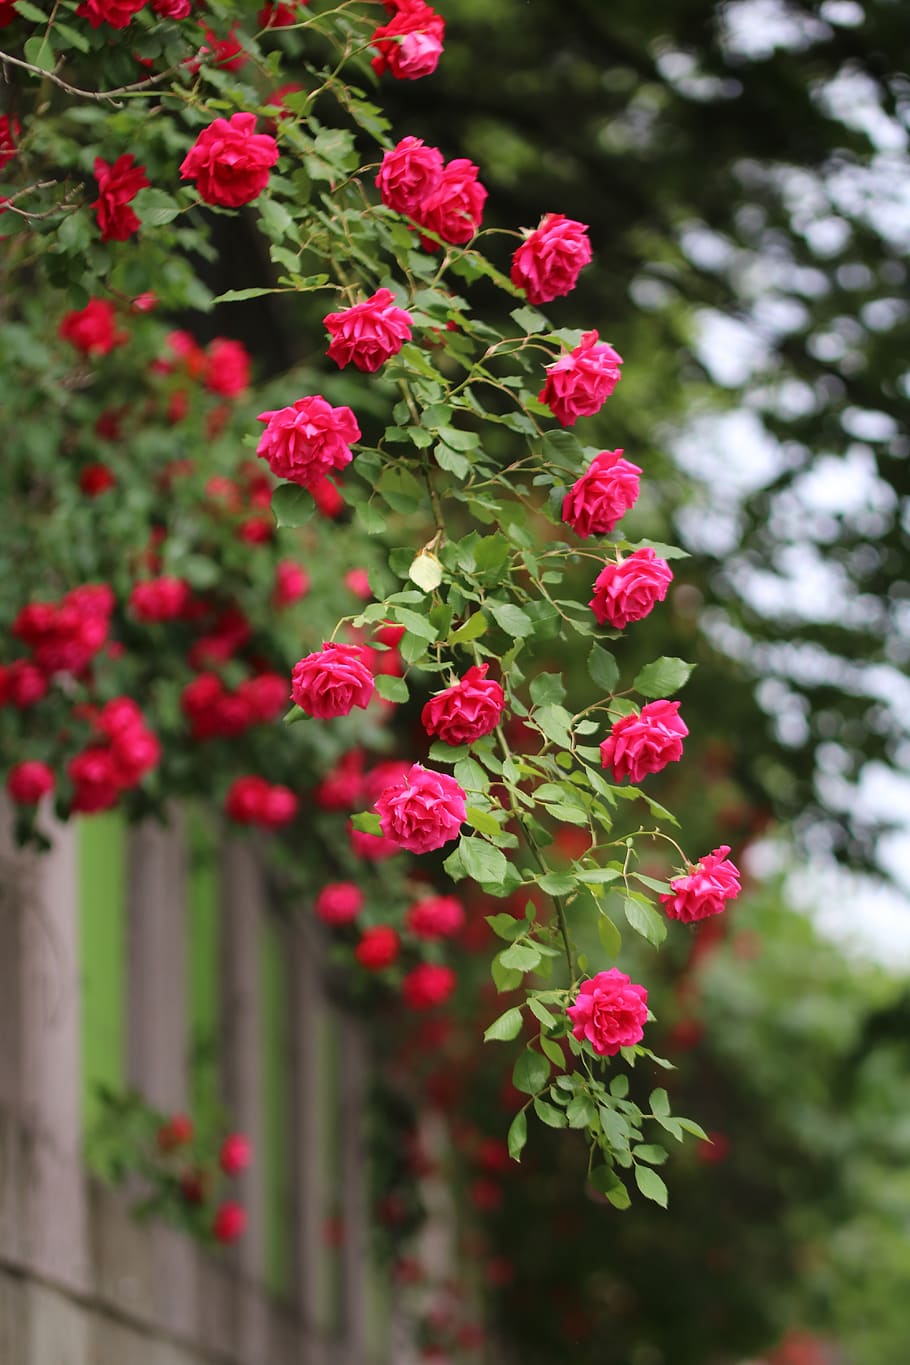 rose, rose vines, nature, plants, beautiful, red roses, fence